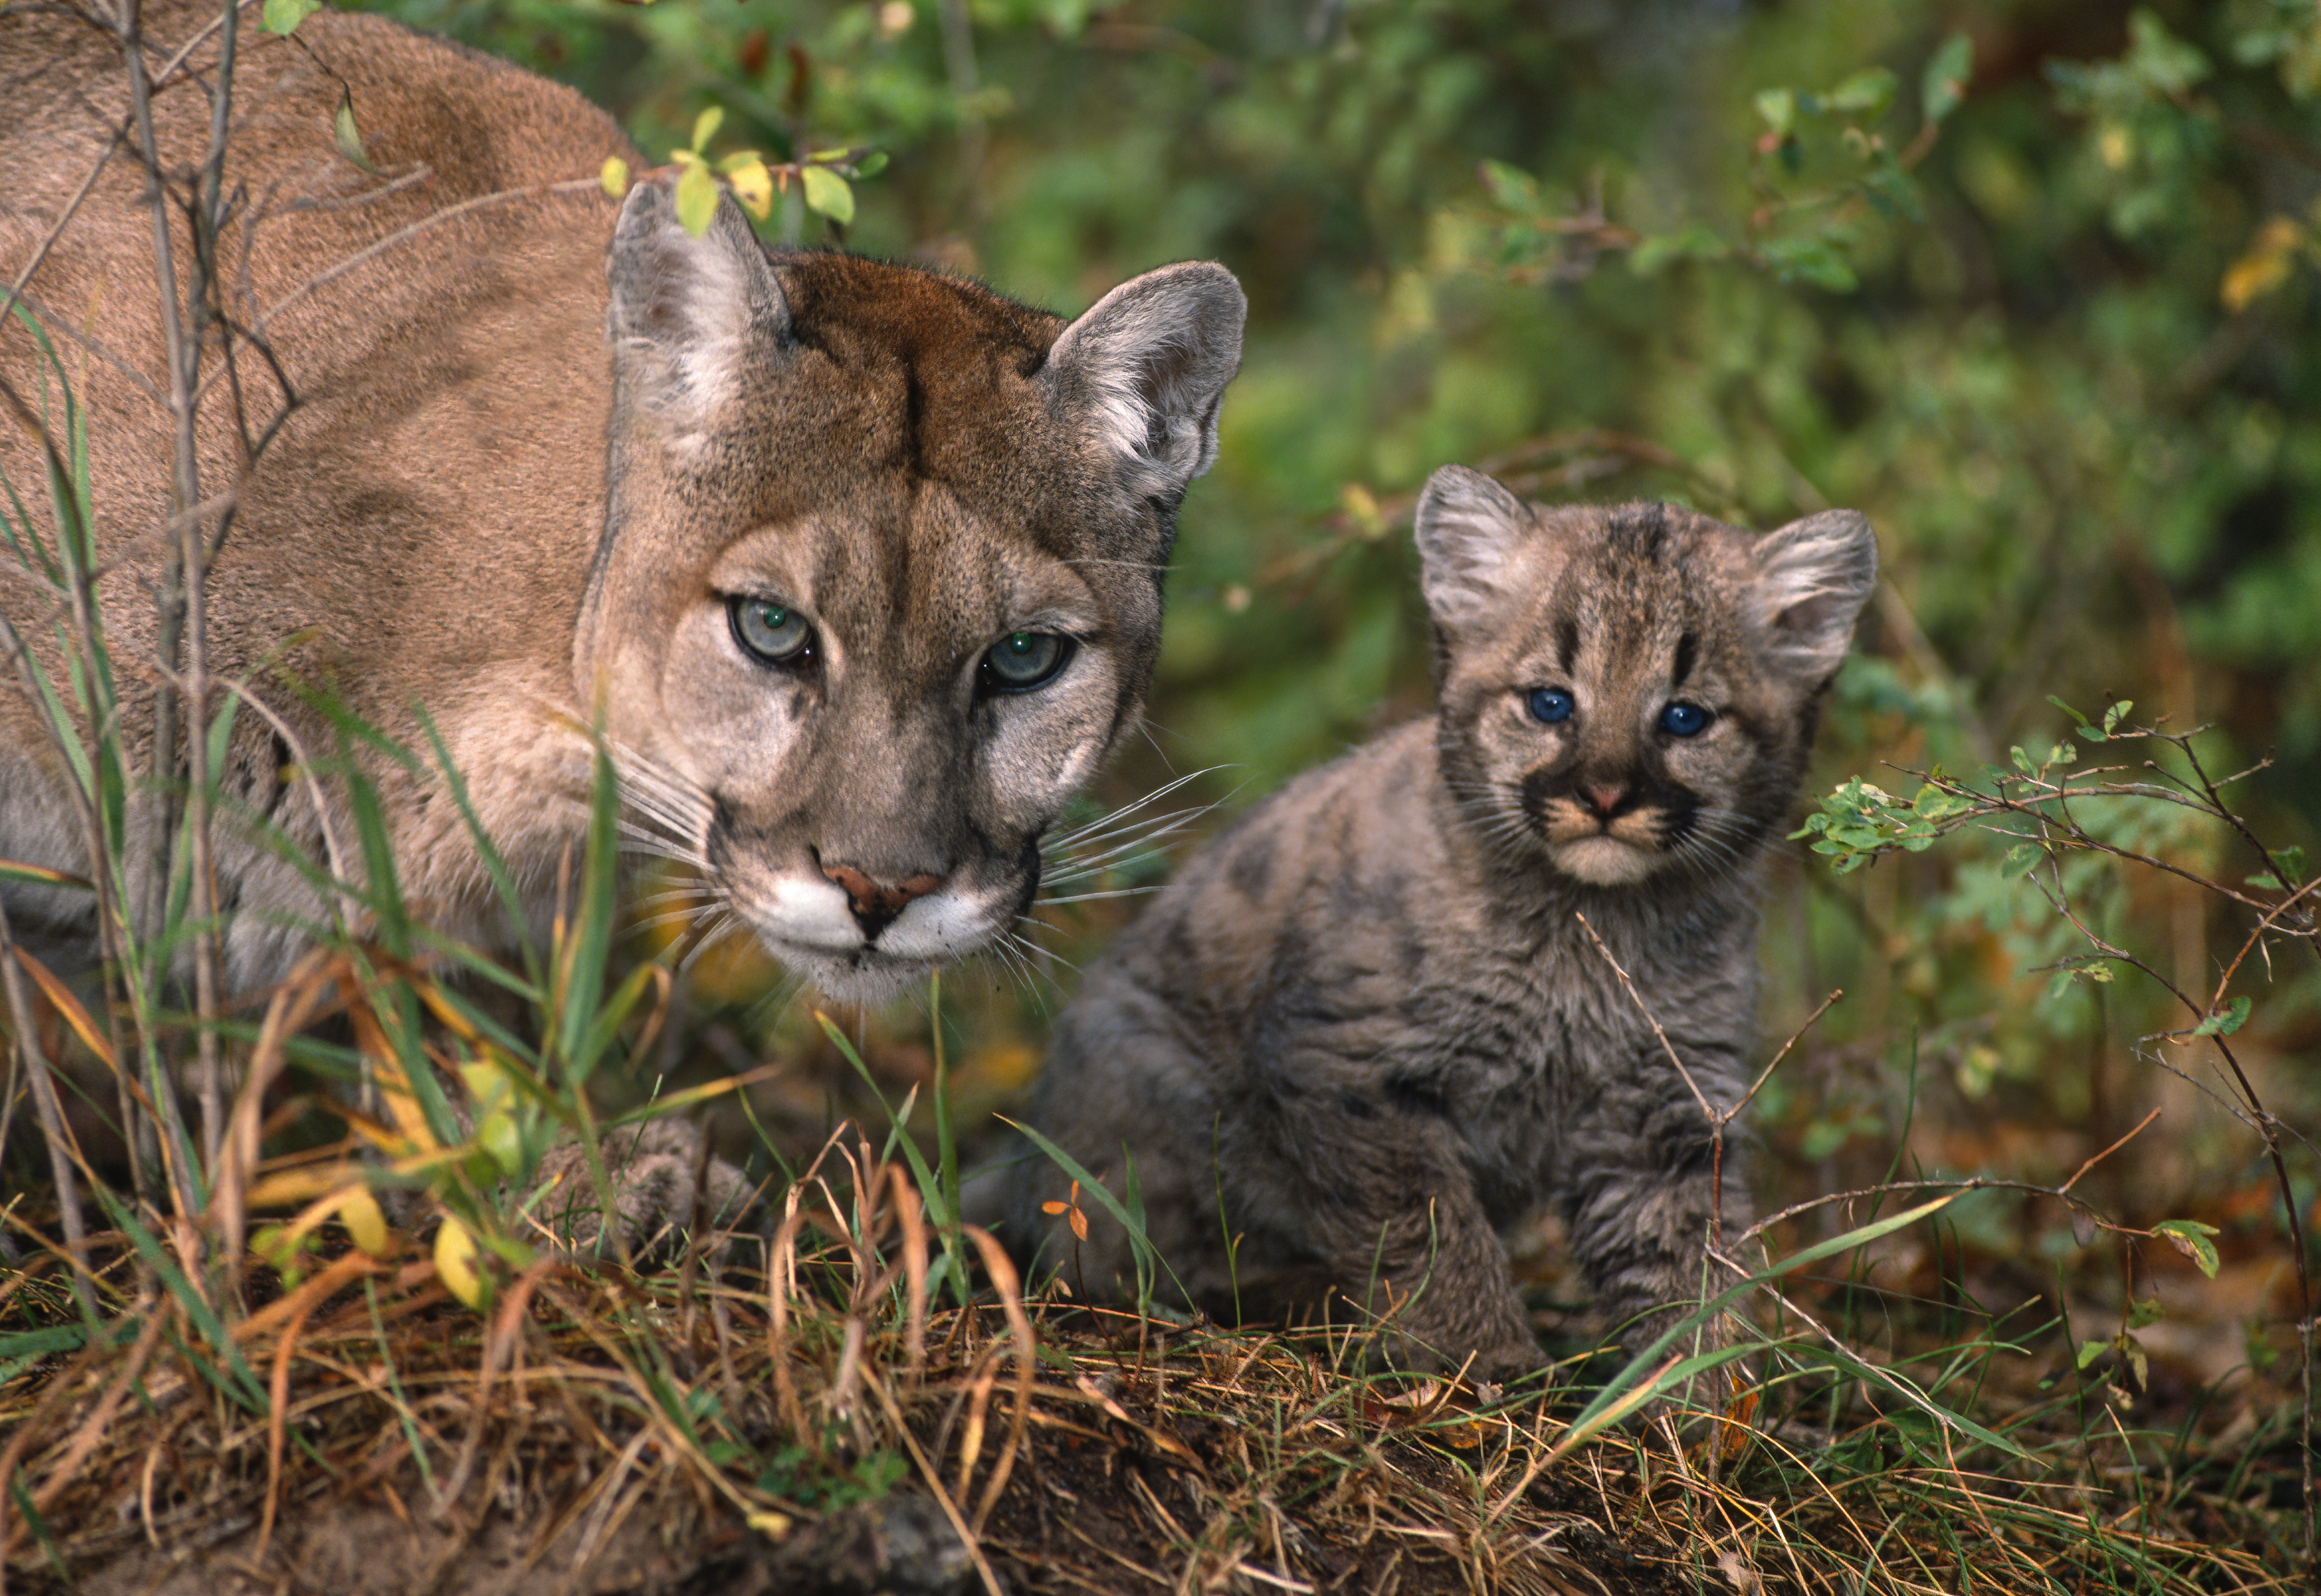 Mother cougar and her kit - Gerald Corsi image